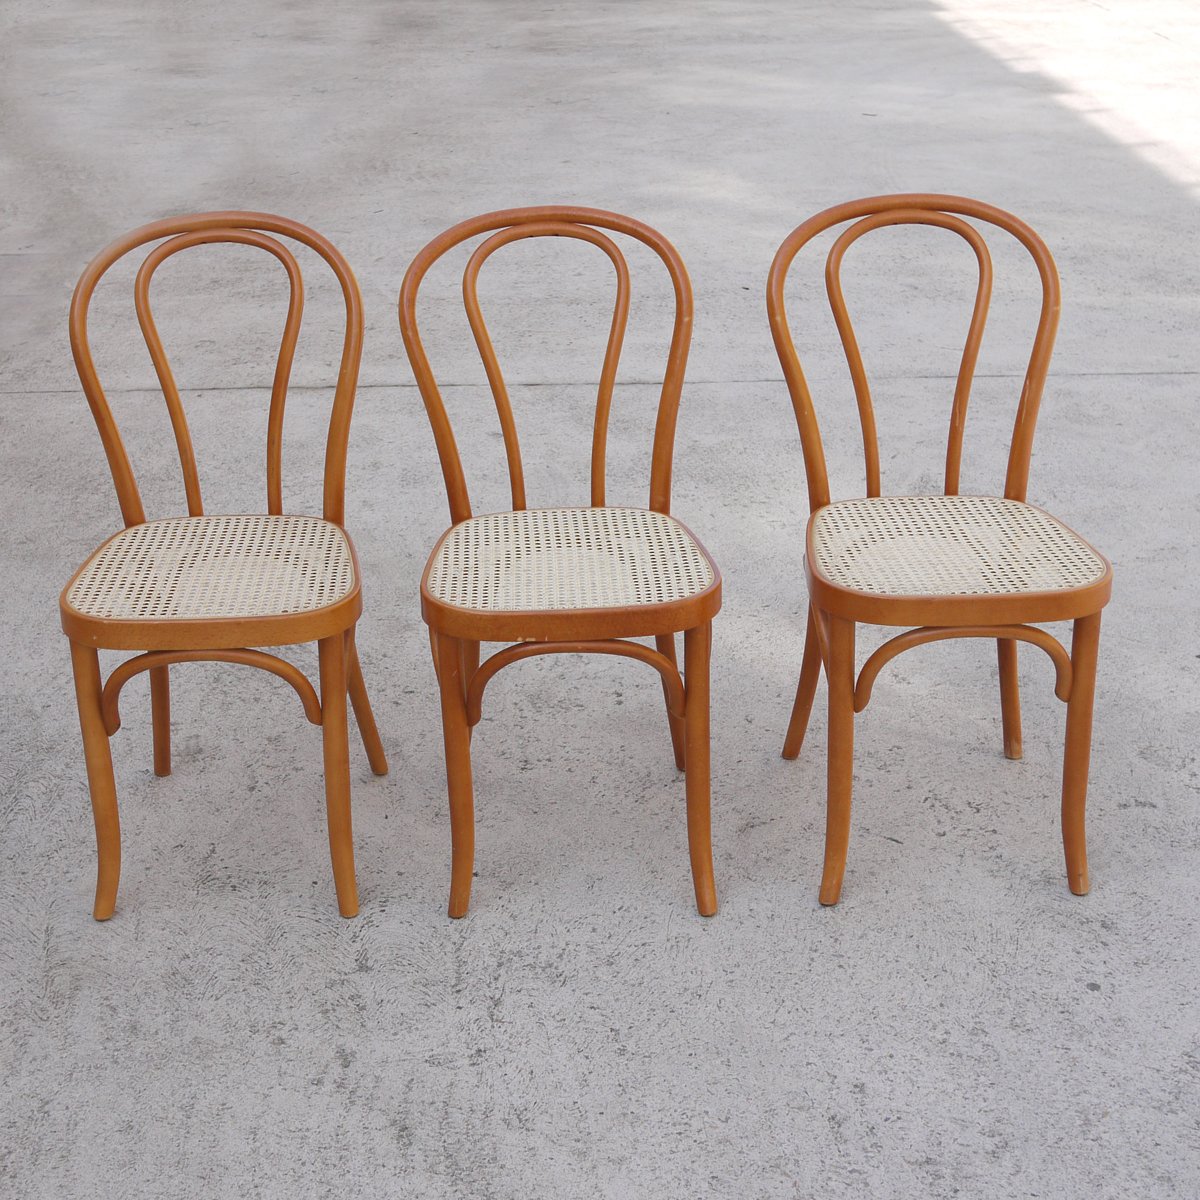 Vintage Bentwood Rattan Dining Chairs, Set of 3 for sale